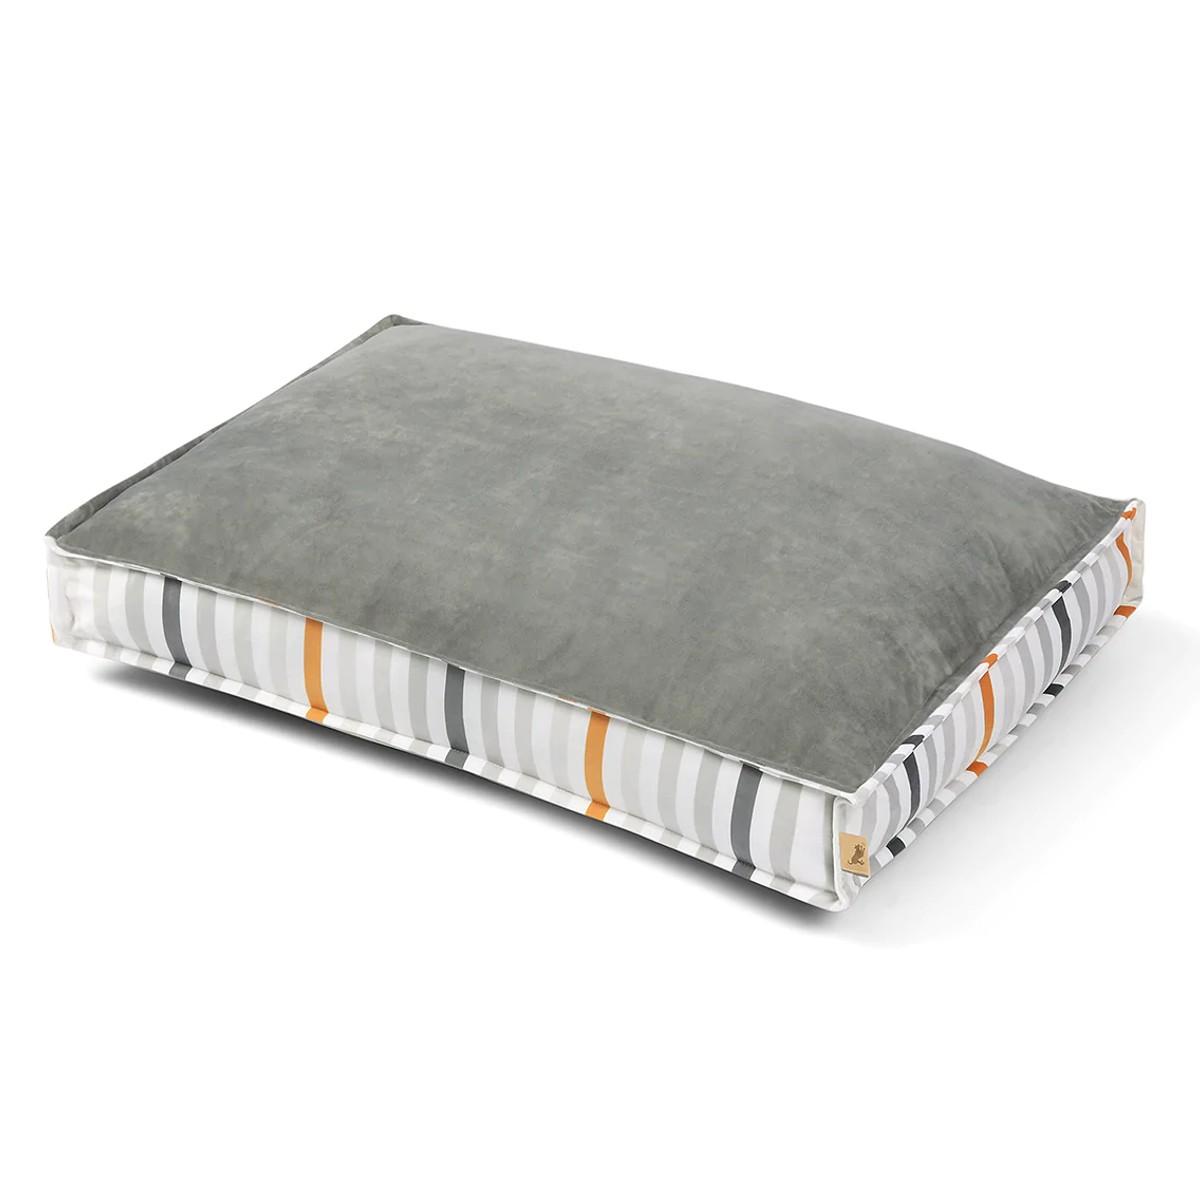 P.L.A.Y. Seaside Rectangular Boxy Dog Bed - Oyster Gray